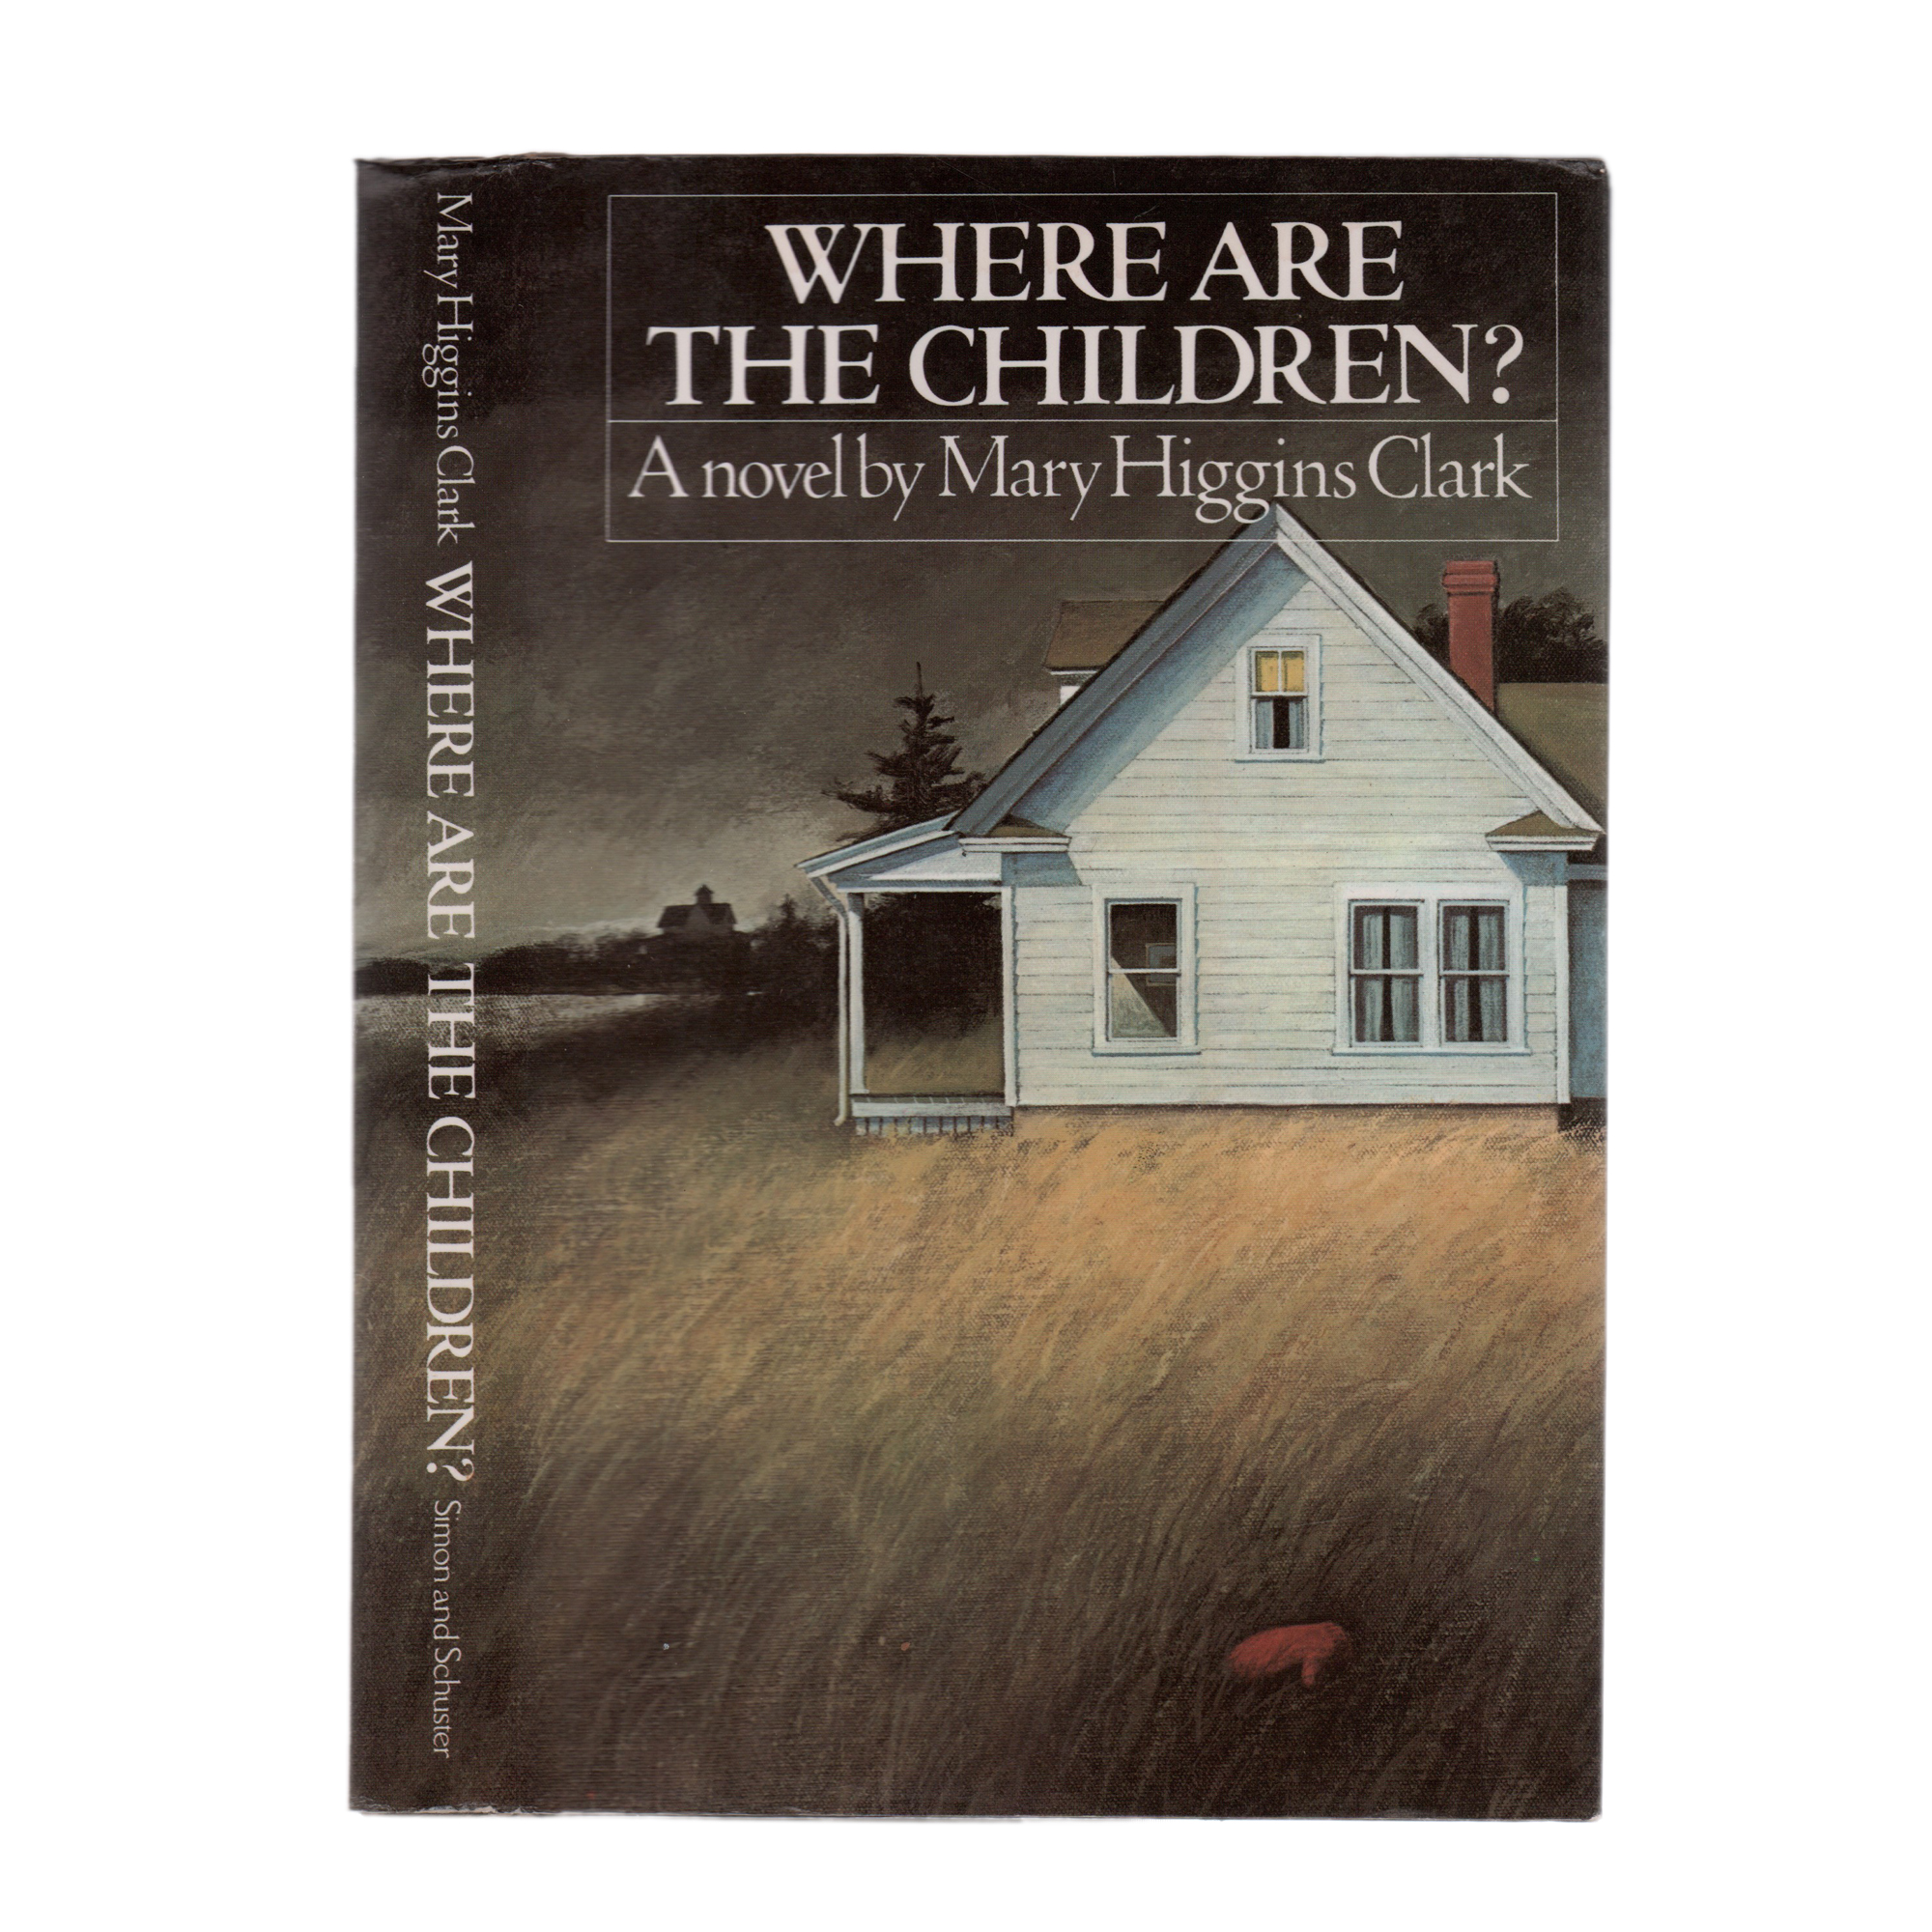 Where Are the Children? by Mary Higgins Clark (1999, Hardcover) for sale online | eBay2000 x 2000